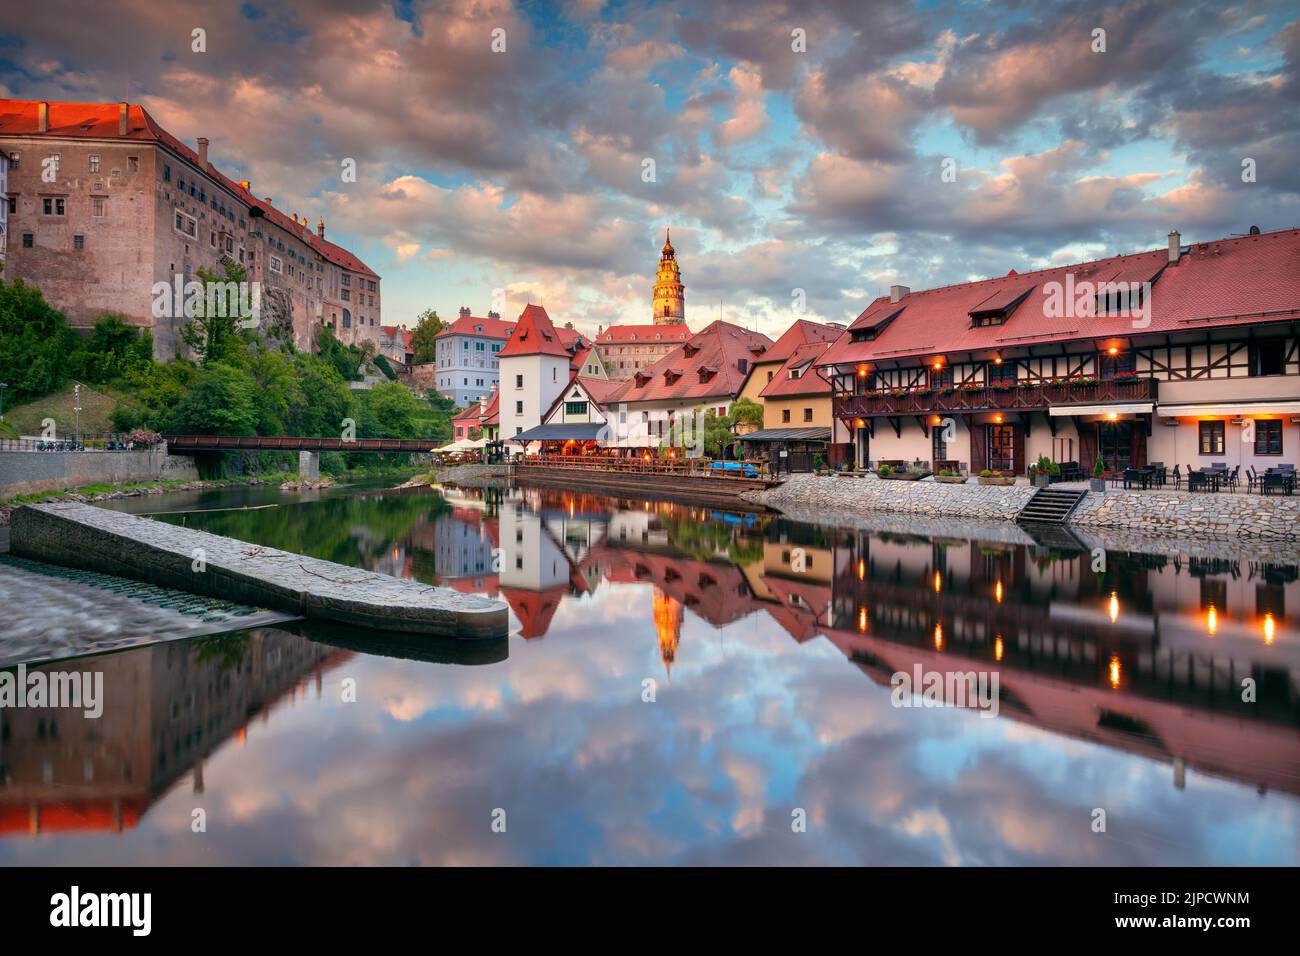 Cesky Krumlov. Cityscape image of downtown Cesky Krumlov, Czech Republic with reflection of the city in Vltava River at summer sunset. Stock Photo